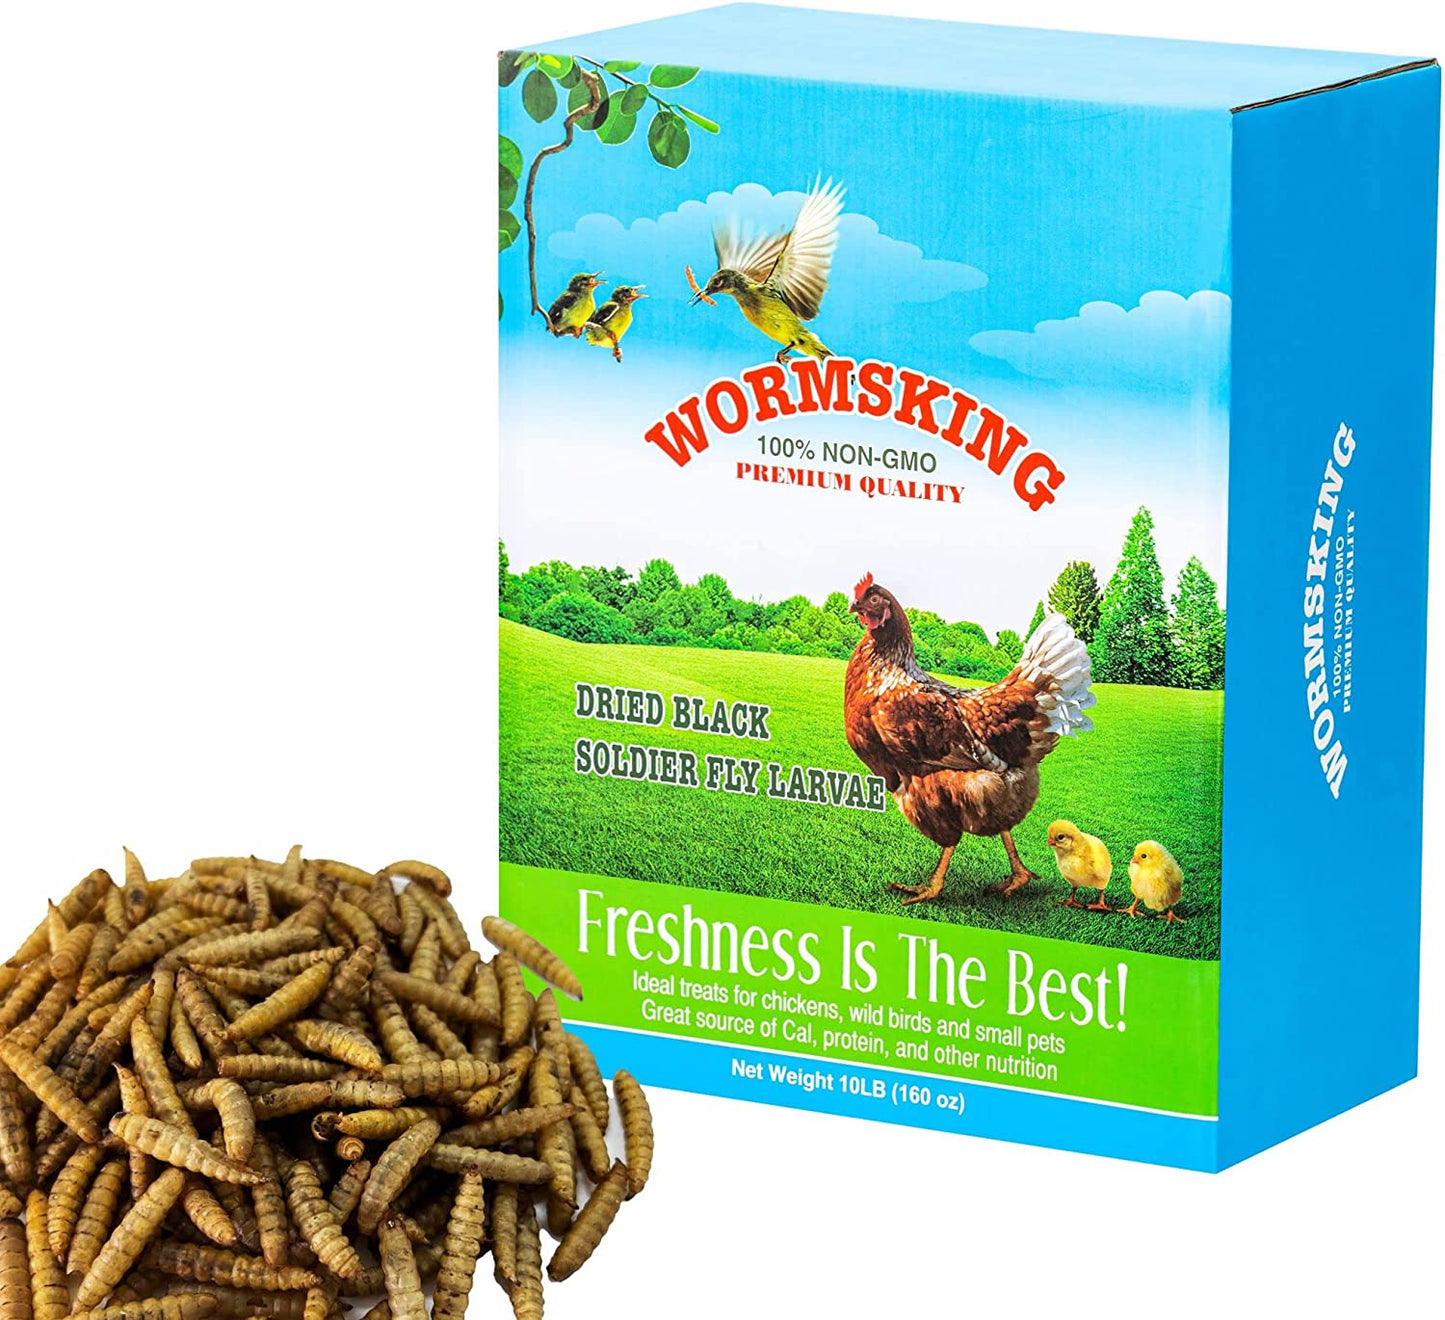 WORMSKING 10LB Non-GMO Dried Black Soldier Fly Larvae, More Calcium Than Dried Mealworms, High Protein Chicken Feed, Chicken Treat